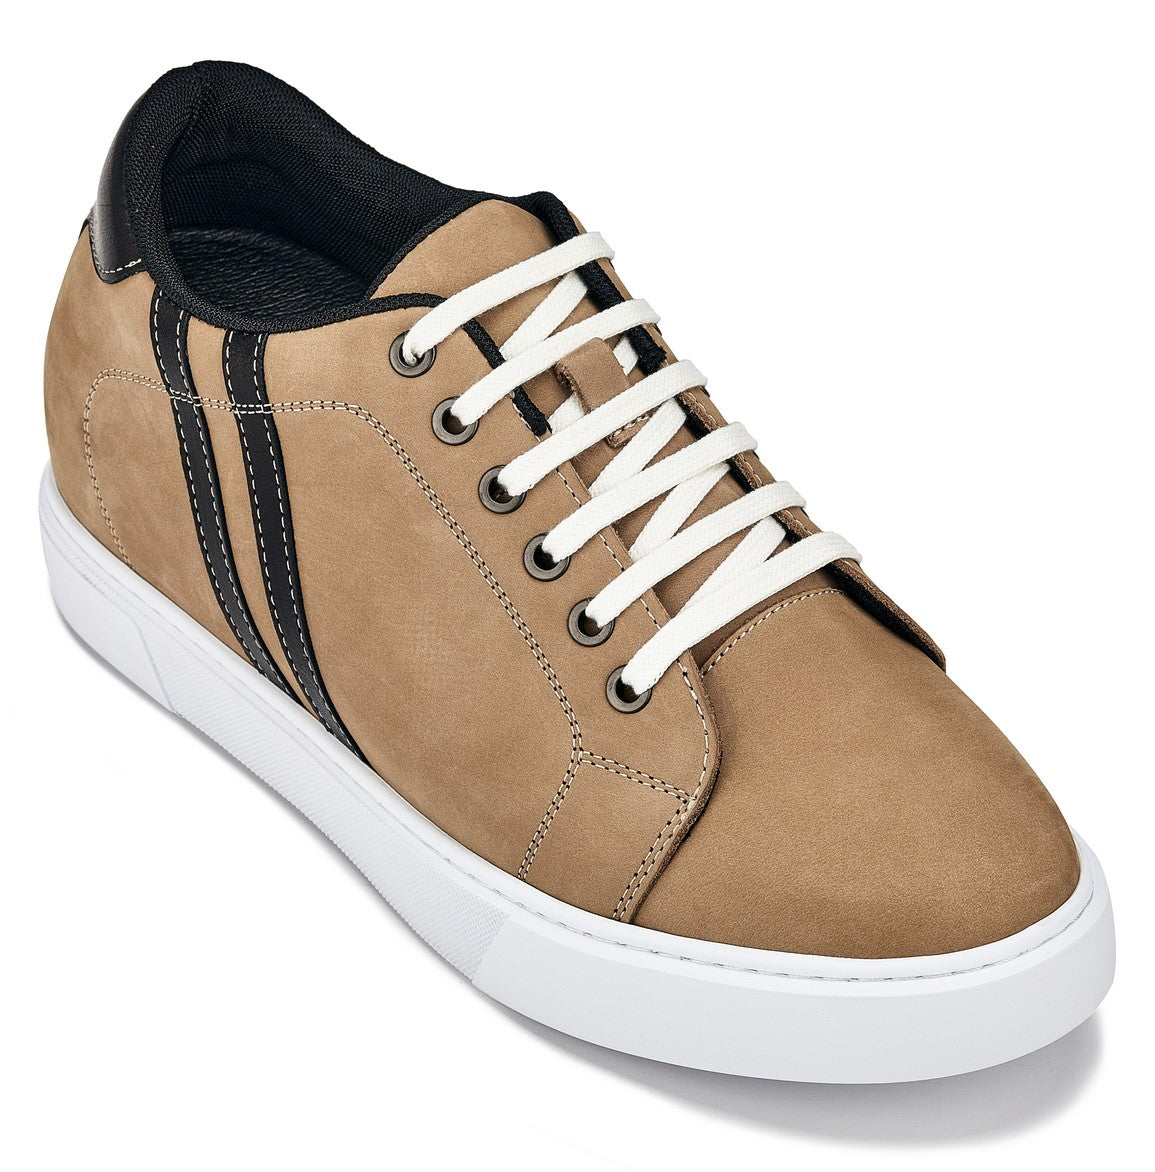 CALTO - K1551 - 2.8 Inches Taller (Nubuck Tan) - Lace Up Casual Sneakers